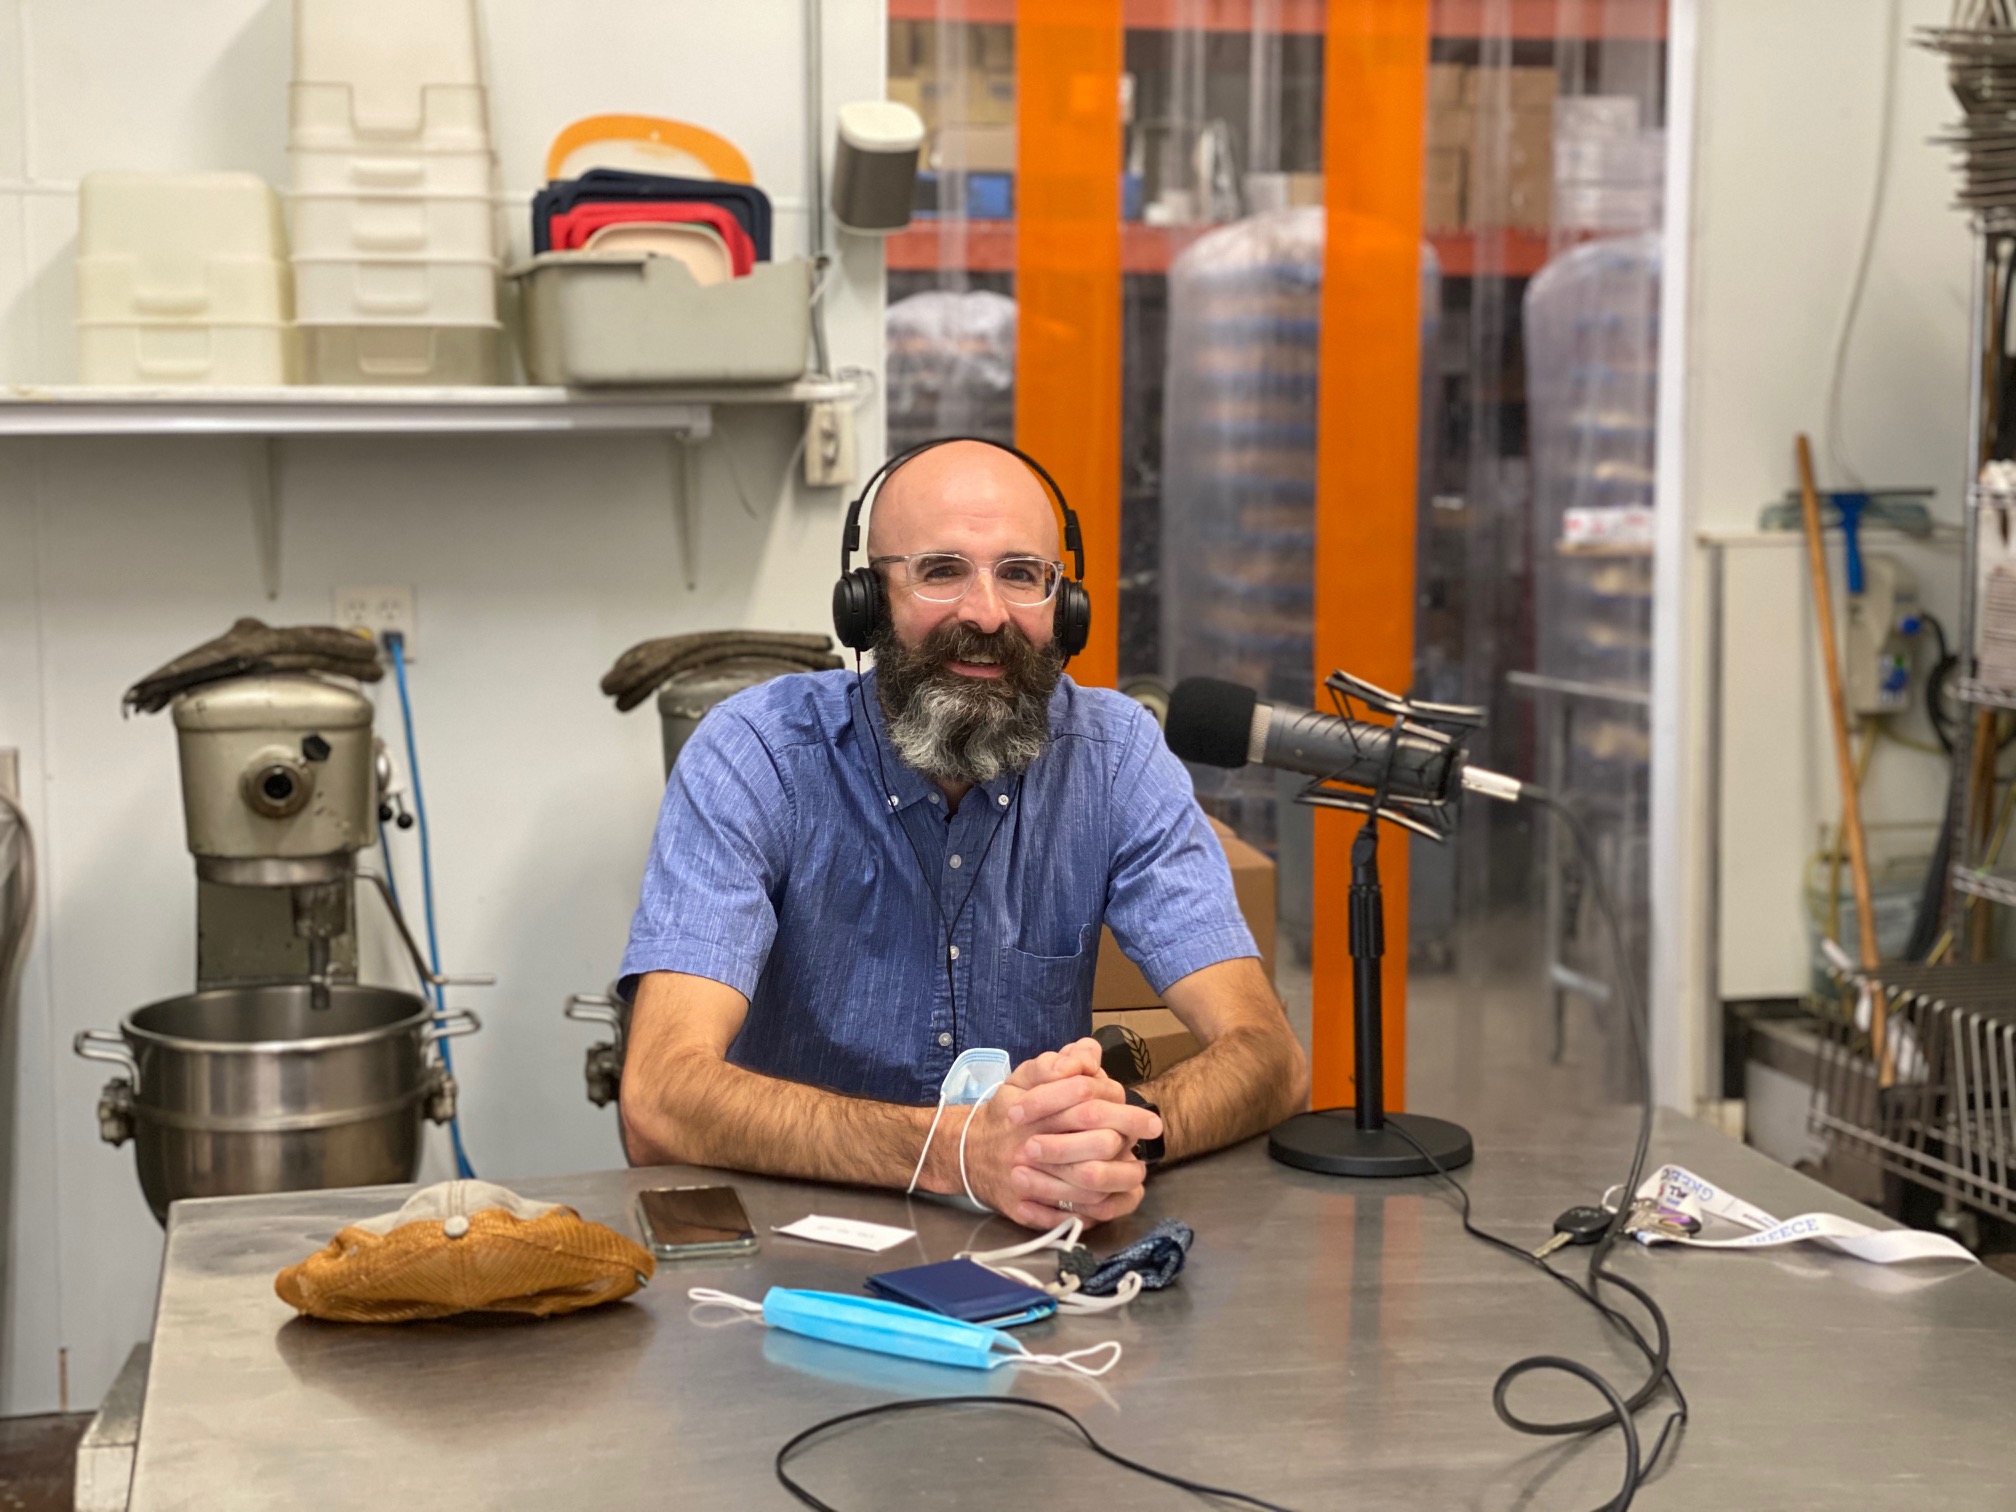 Ryan Faber From On The Rise Bread Co. to Faber’s Bakery & Deli – Culinary Treasure Podcast Episode 75 by Steven Shomler 